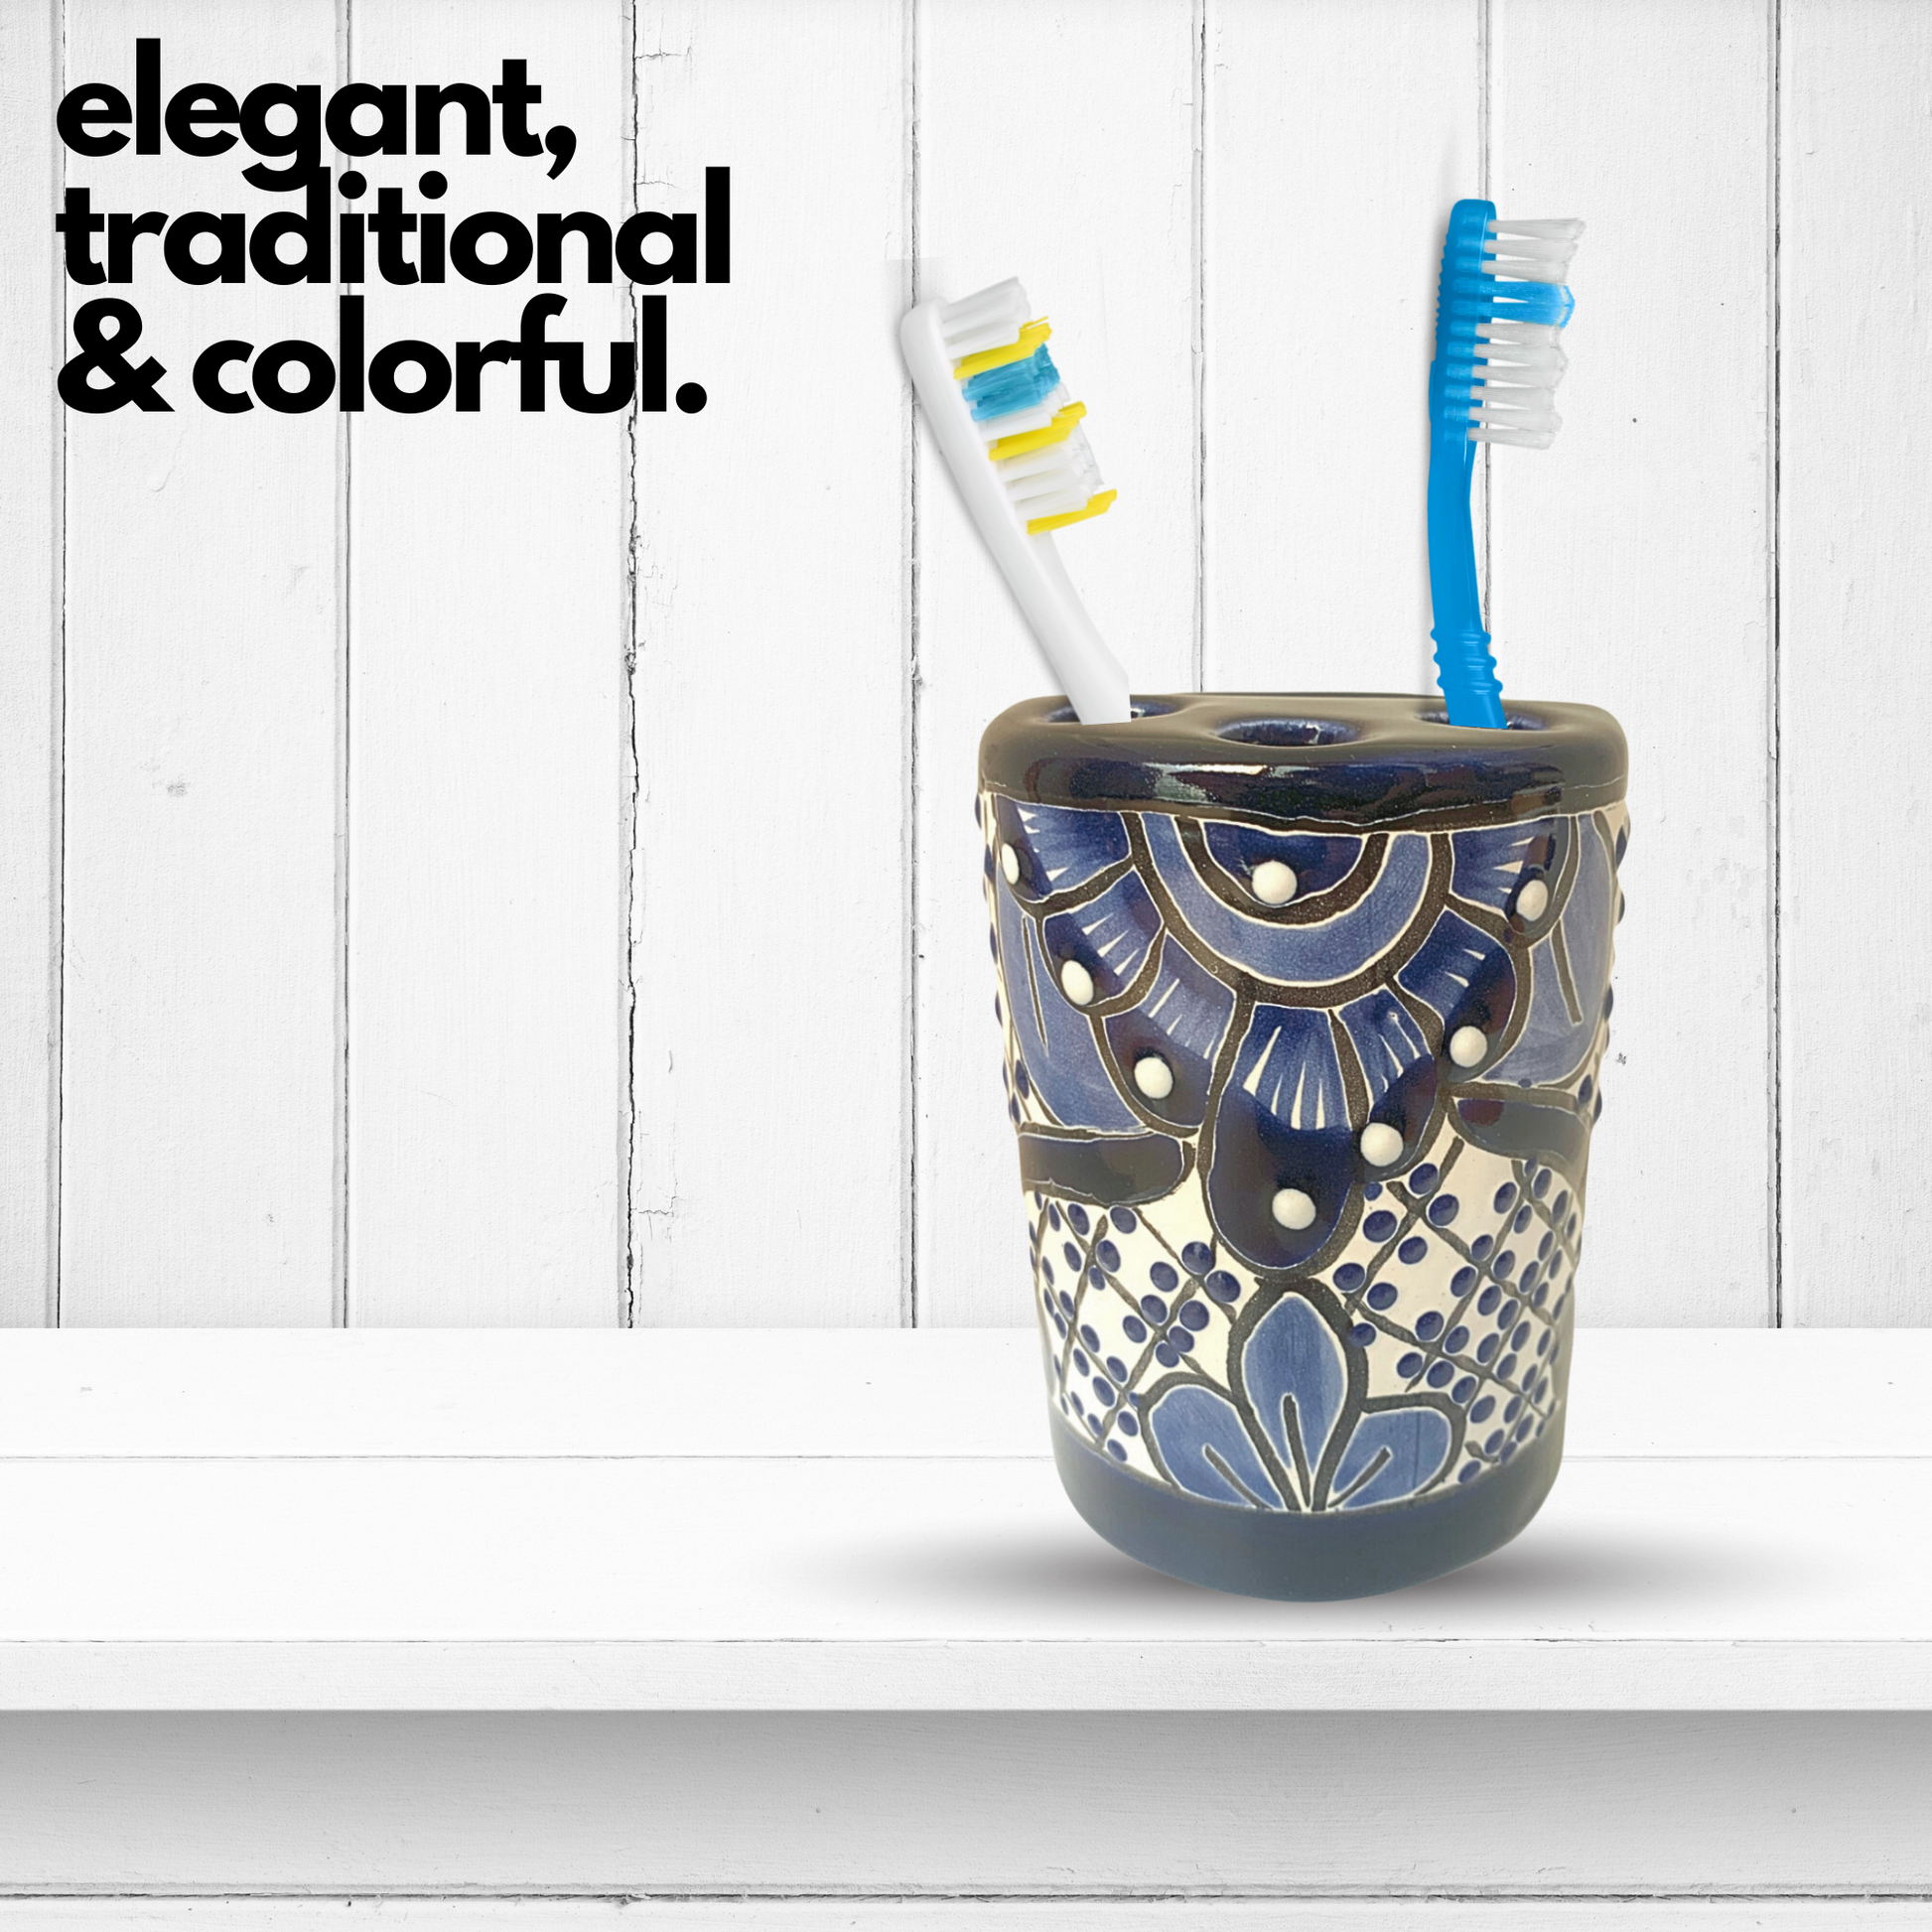 elegant traditional and colorful Hand-painted Talavera Toothbrush Holder by Casa Fiesta Designs, offers compact storage and adds charm to your bathroom.